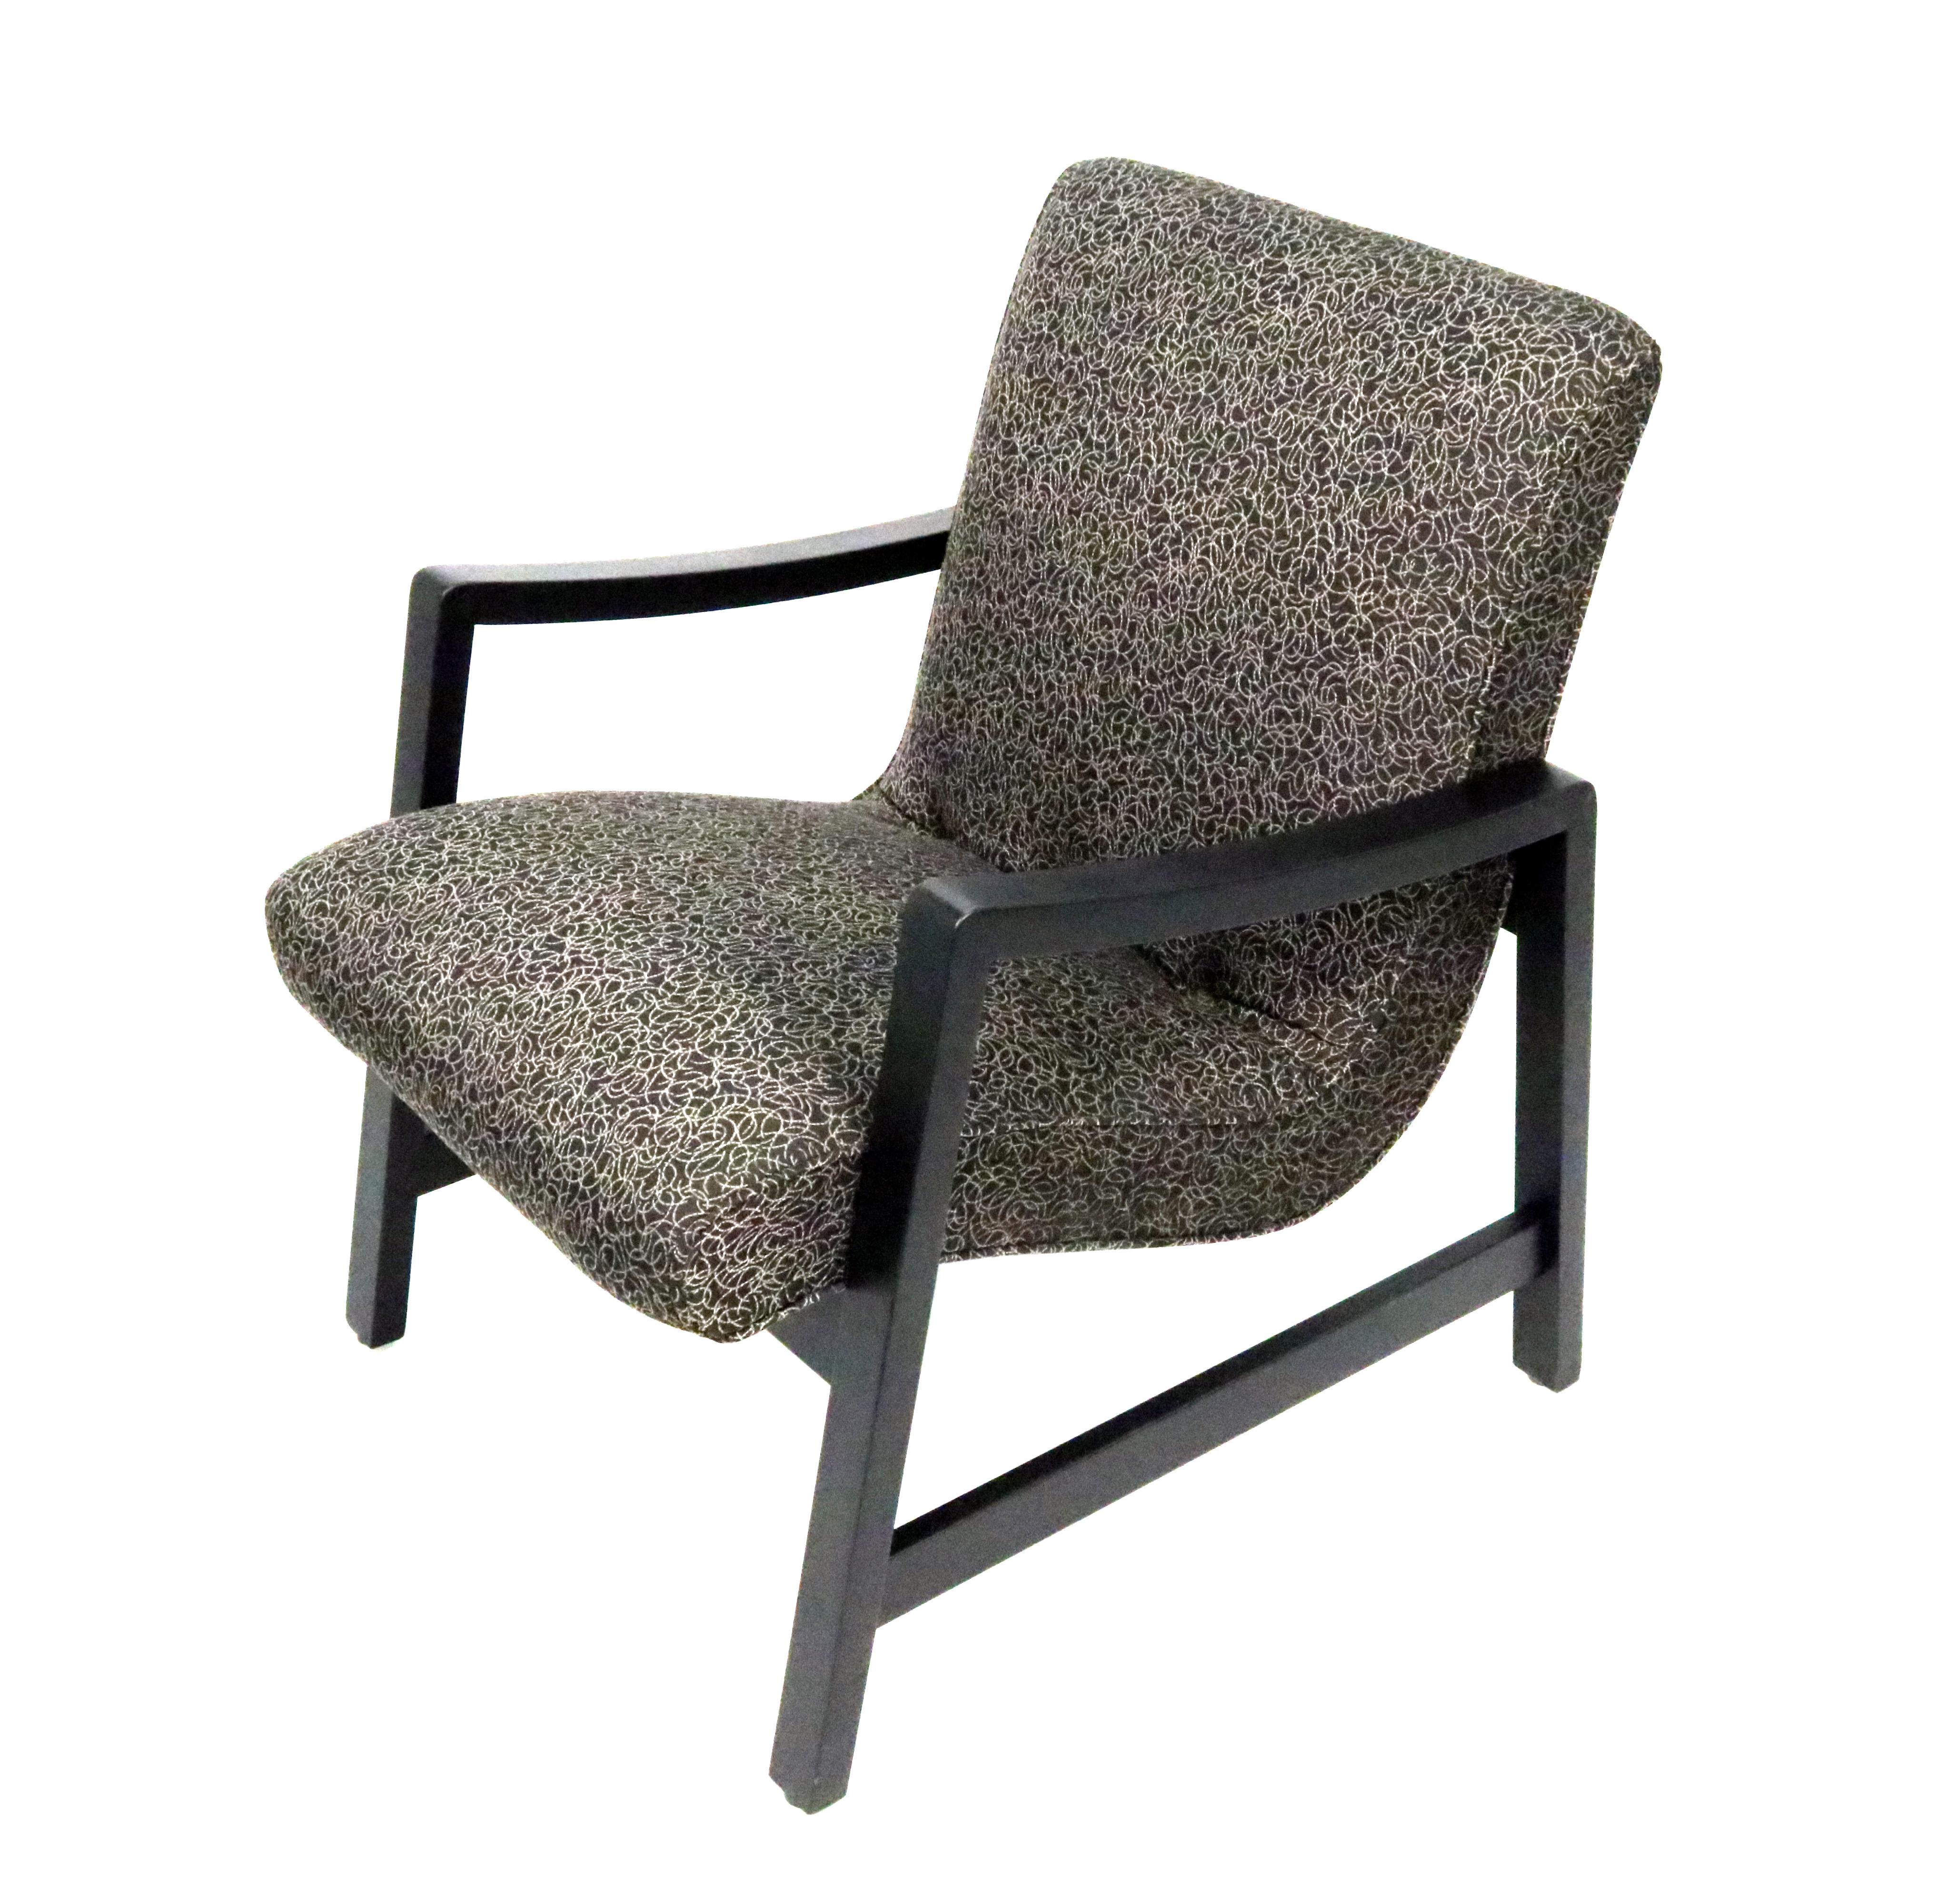 American Early Jens Risom Lounge Chair for Knoll Associates